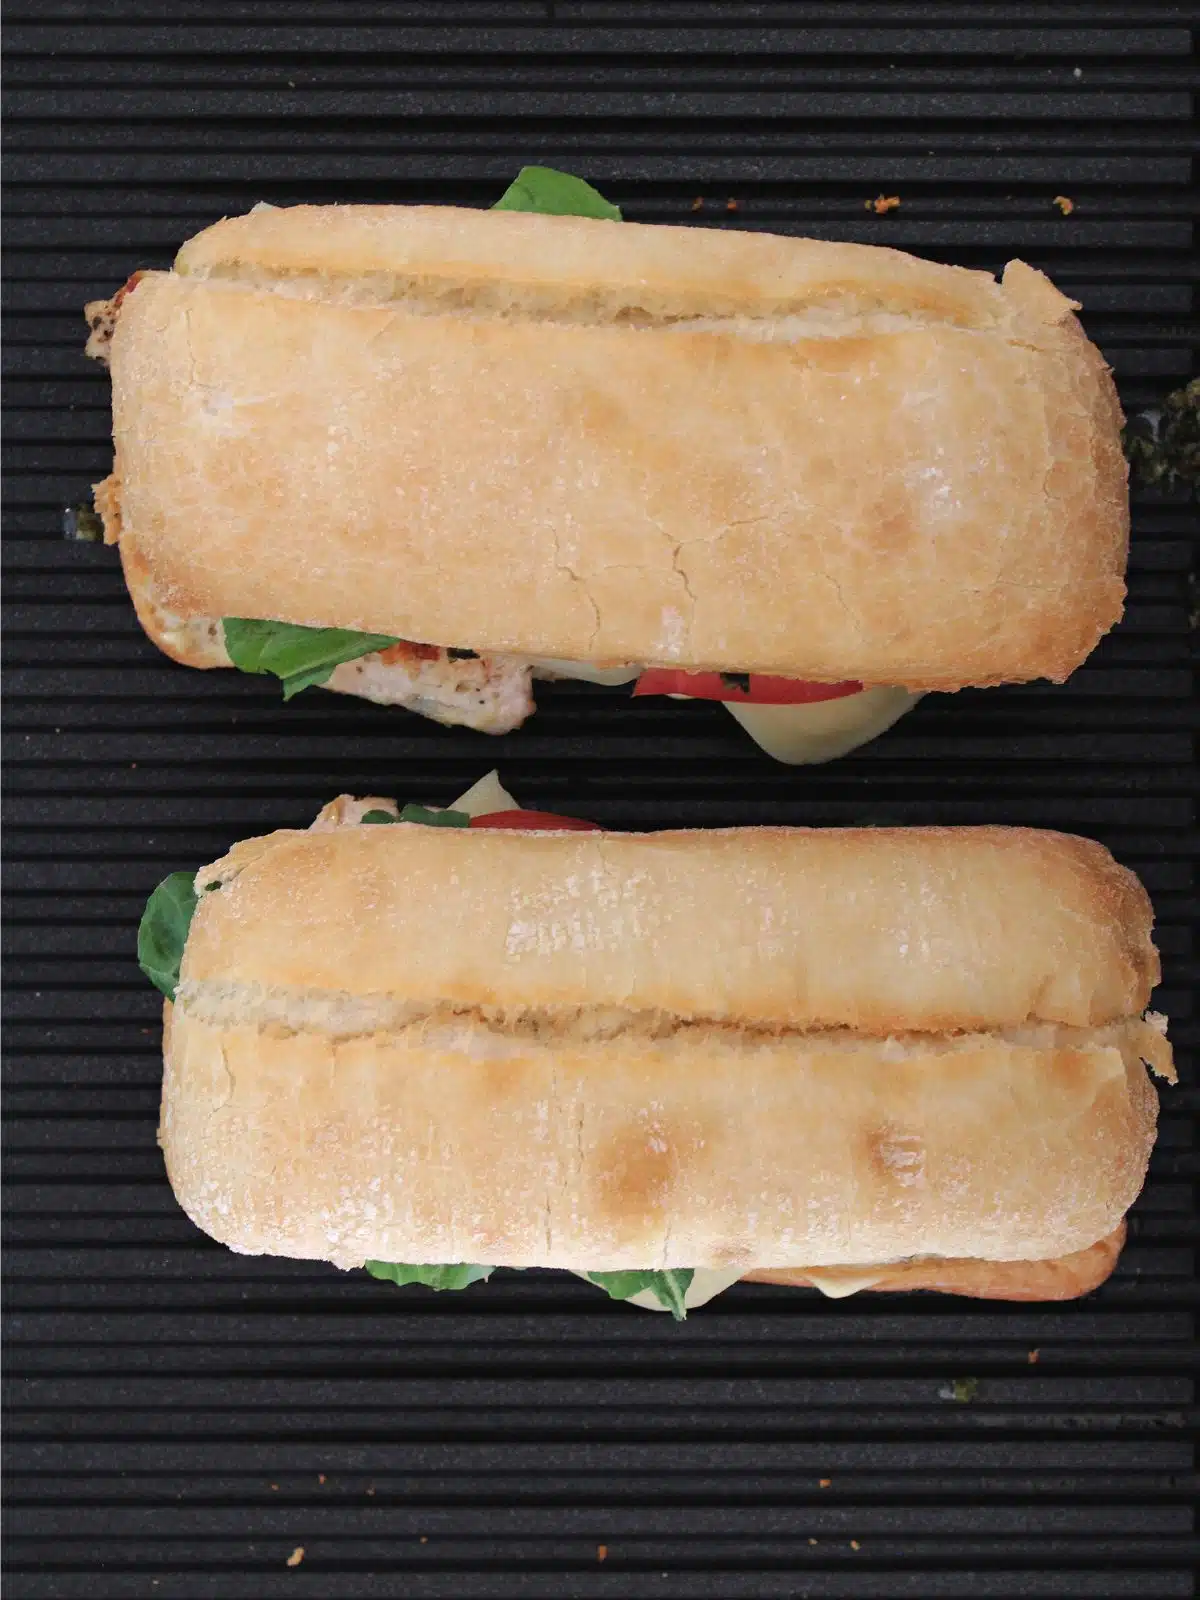 Tops of the bread placed on the sandwiches